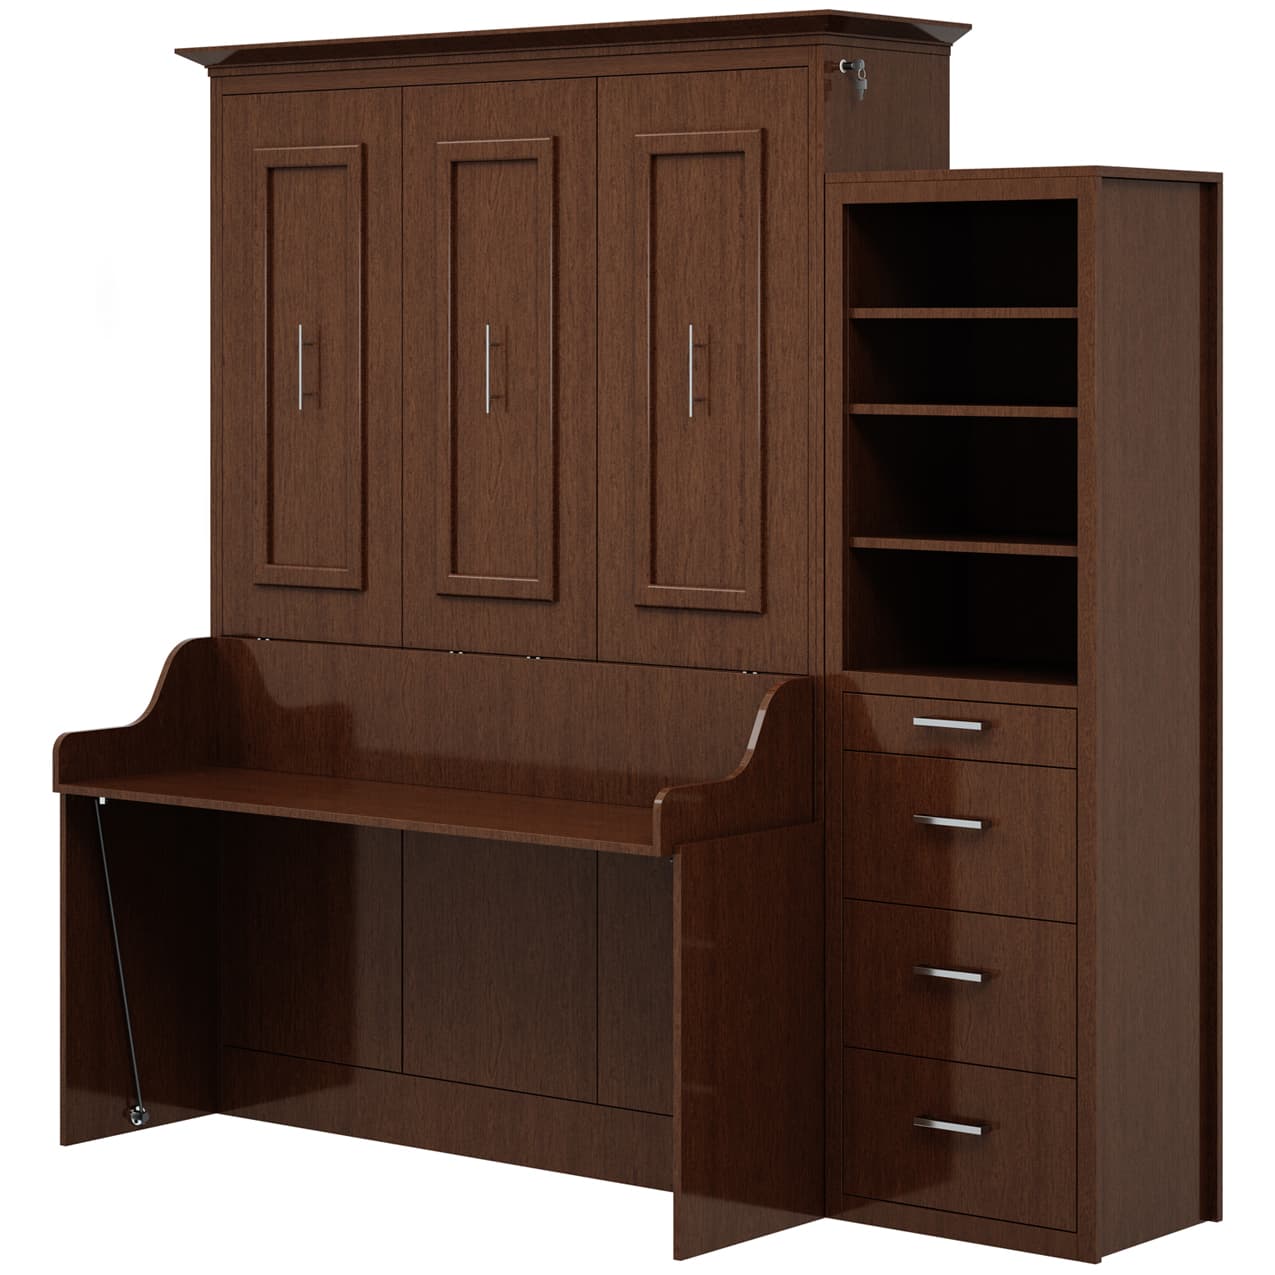 Coventry Full queen double murphy bed with desk and storage cabinet pull down fold out hidden hideaway foldable wall bed cabinet diy murphy bed kit office bed murphy desk bed combo shelves drawers pullout nightstand 